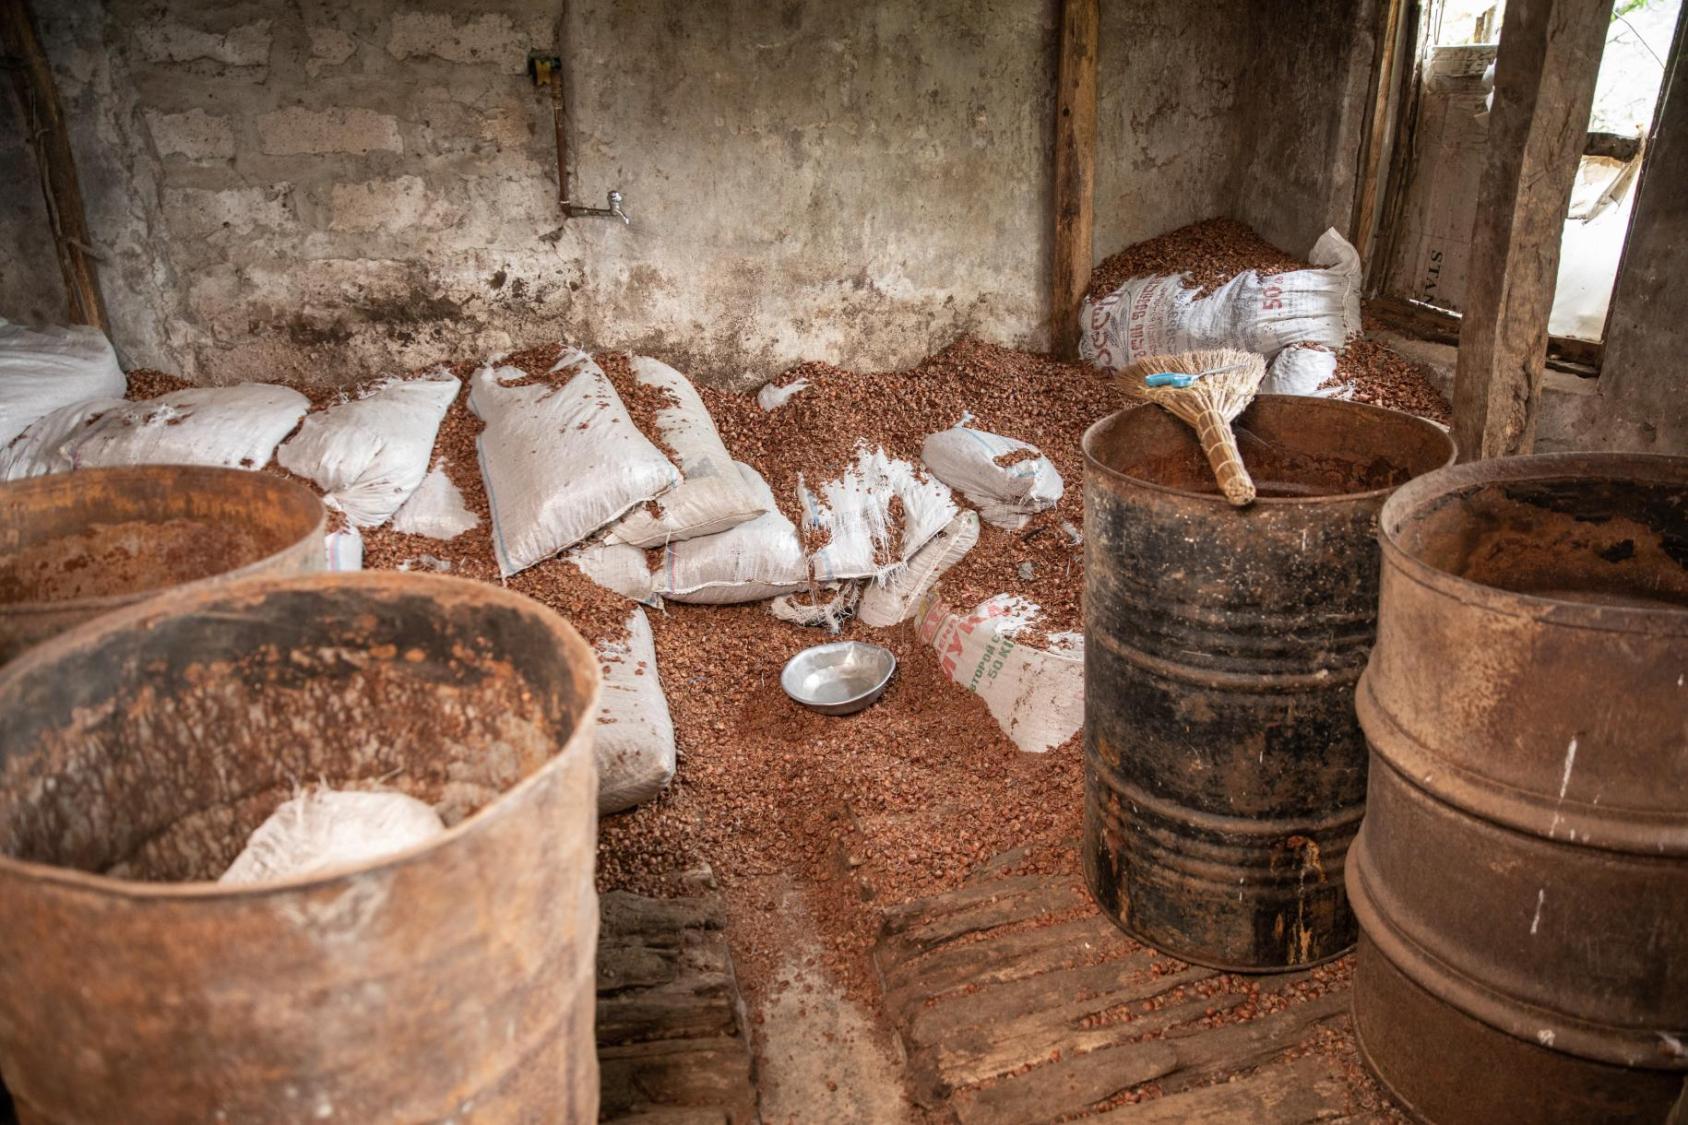 Giant tubs of brown hazelnut shells in a shed with white walls and white sacks on the floor